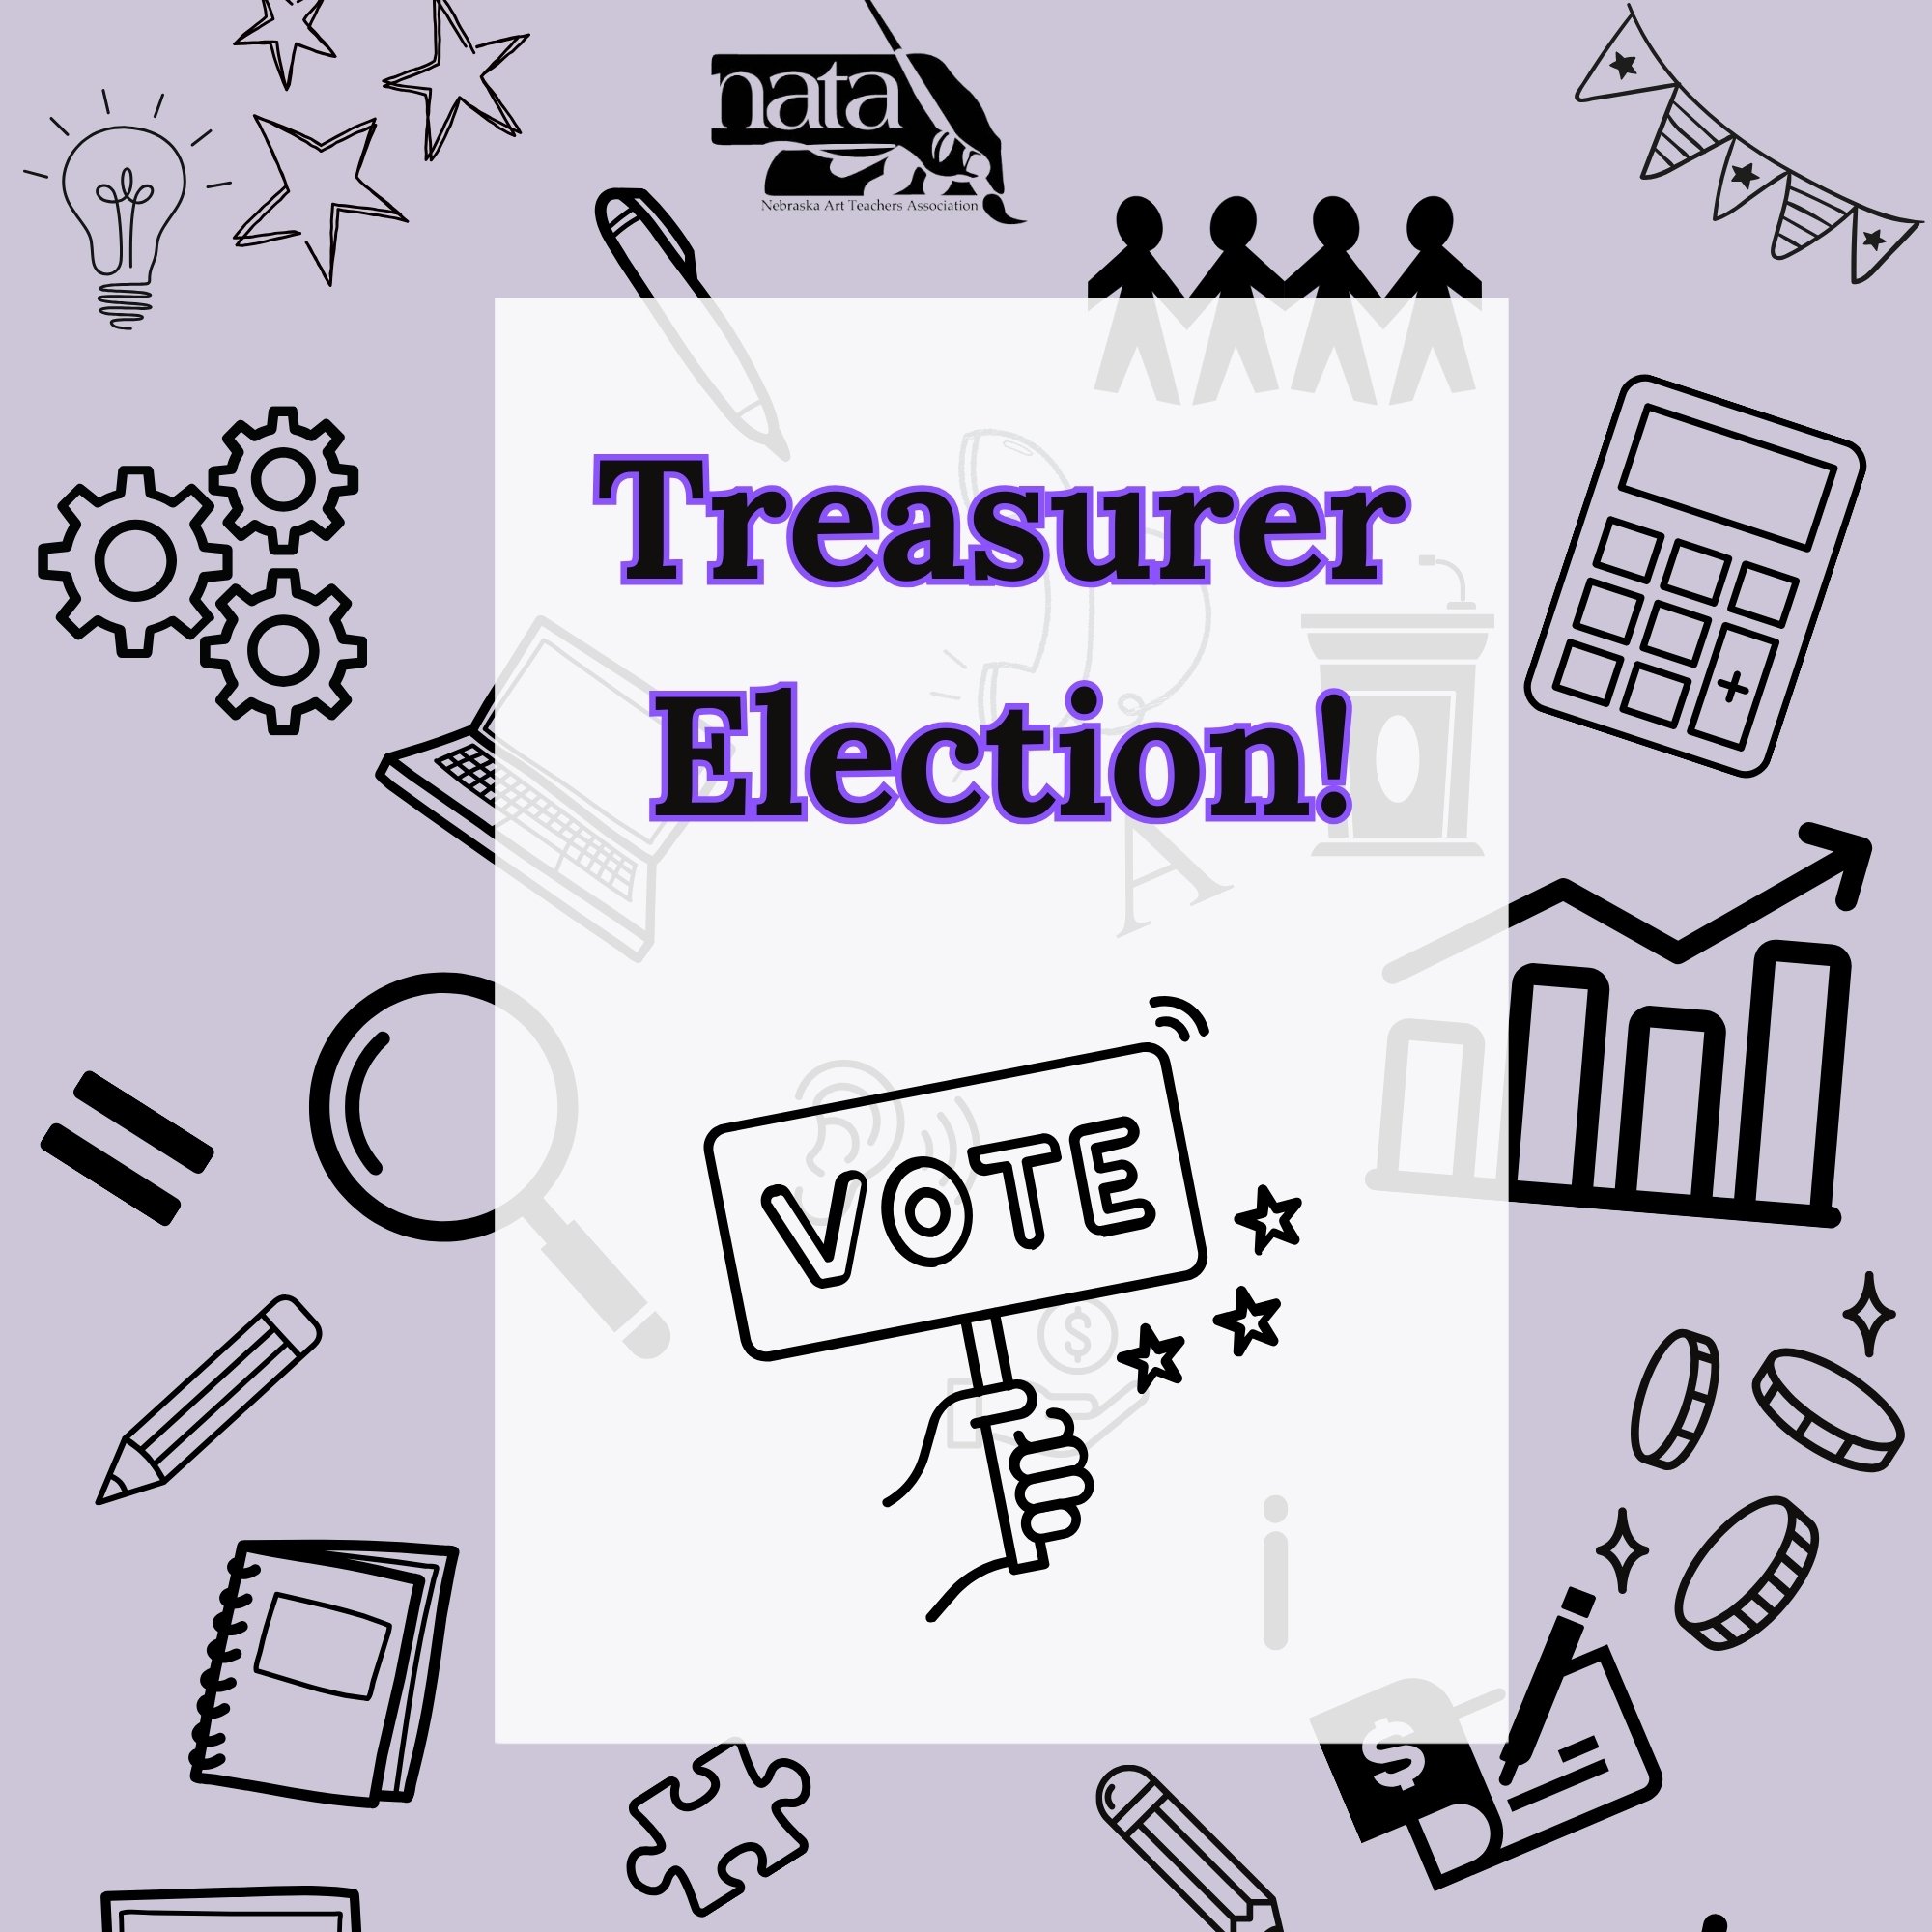 We have a treasurer nomination and its time to VOTE!
The 2024 NATA Treasurer Election is officially live! 
We are looking forward to our shared organization's future and we need you to shape it. NATA members please check your email for the voting lin